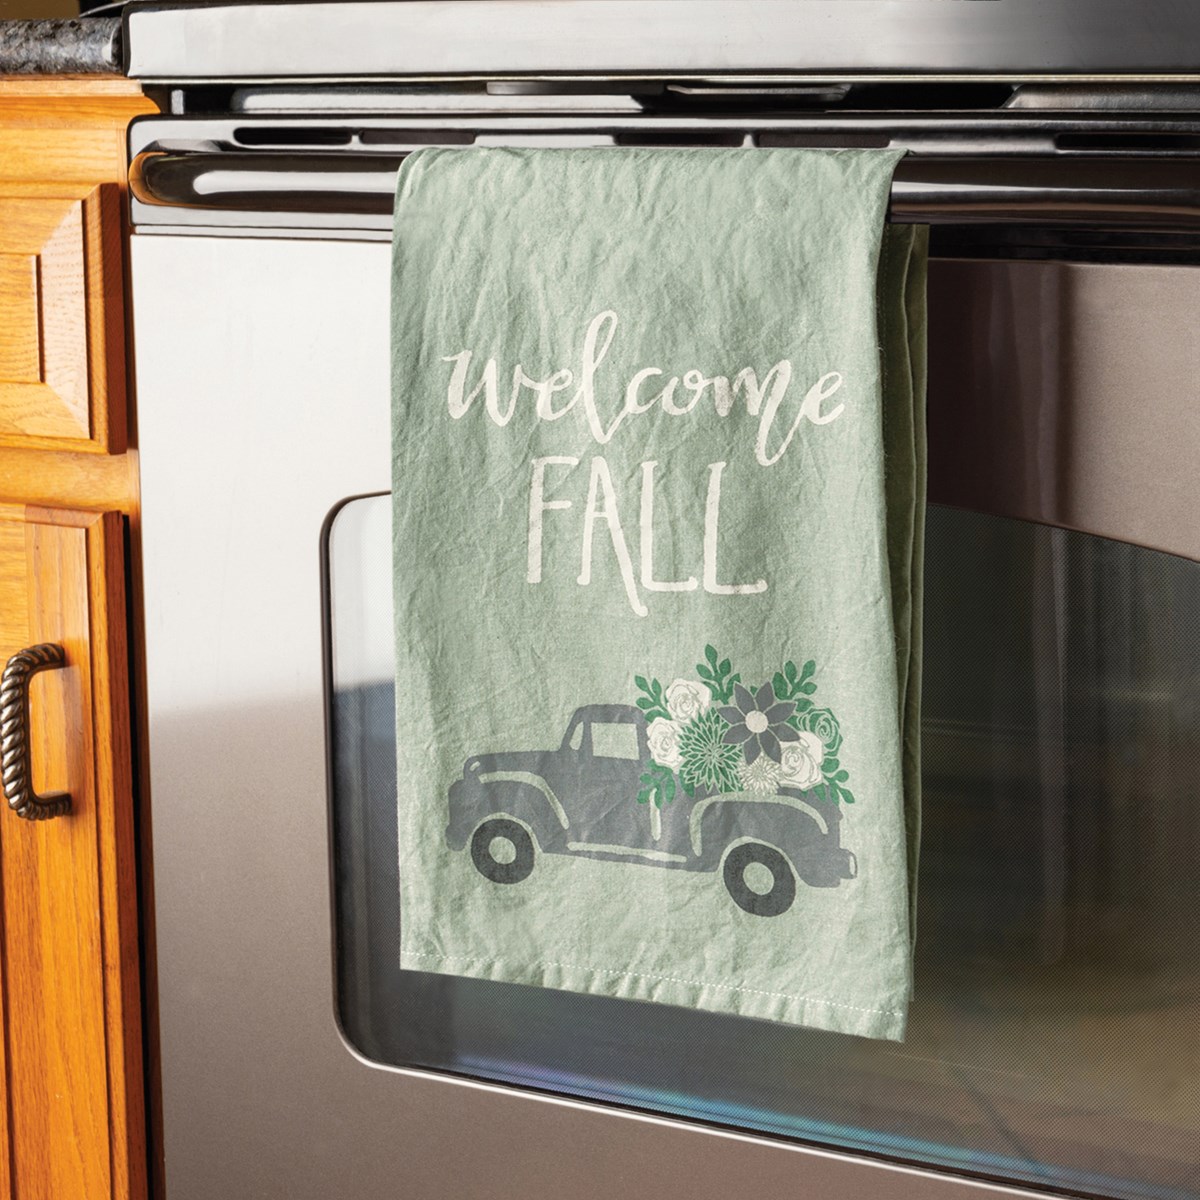 Welcome Fall Truck Kitchen Towel - Cotton